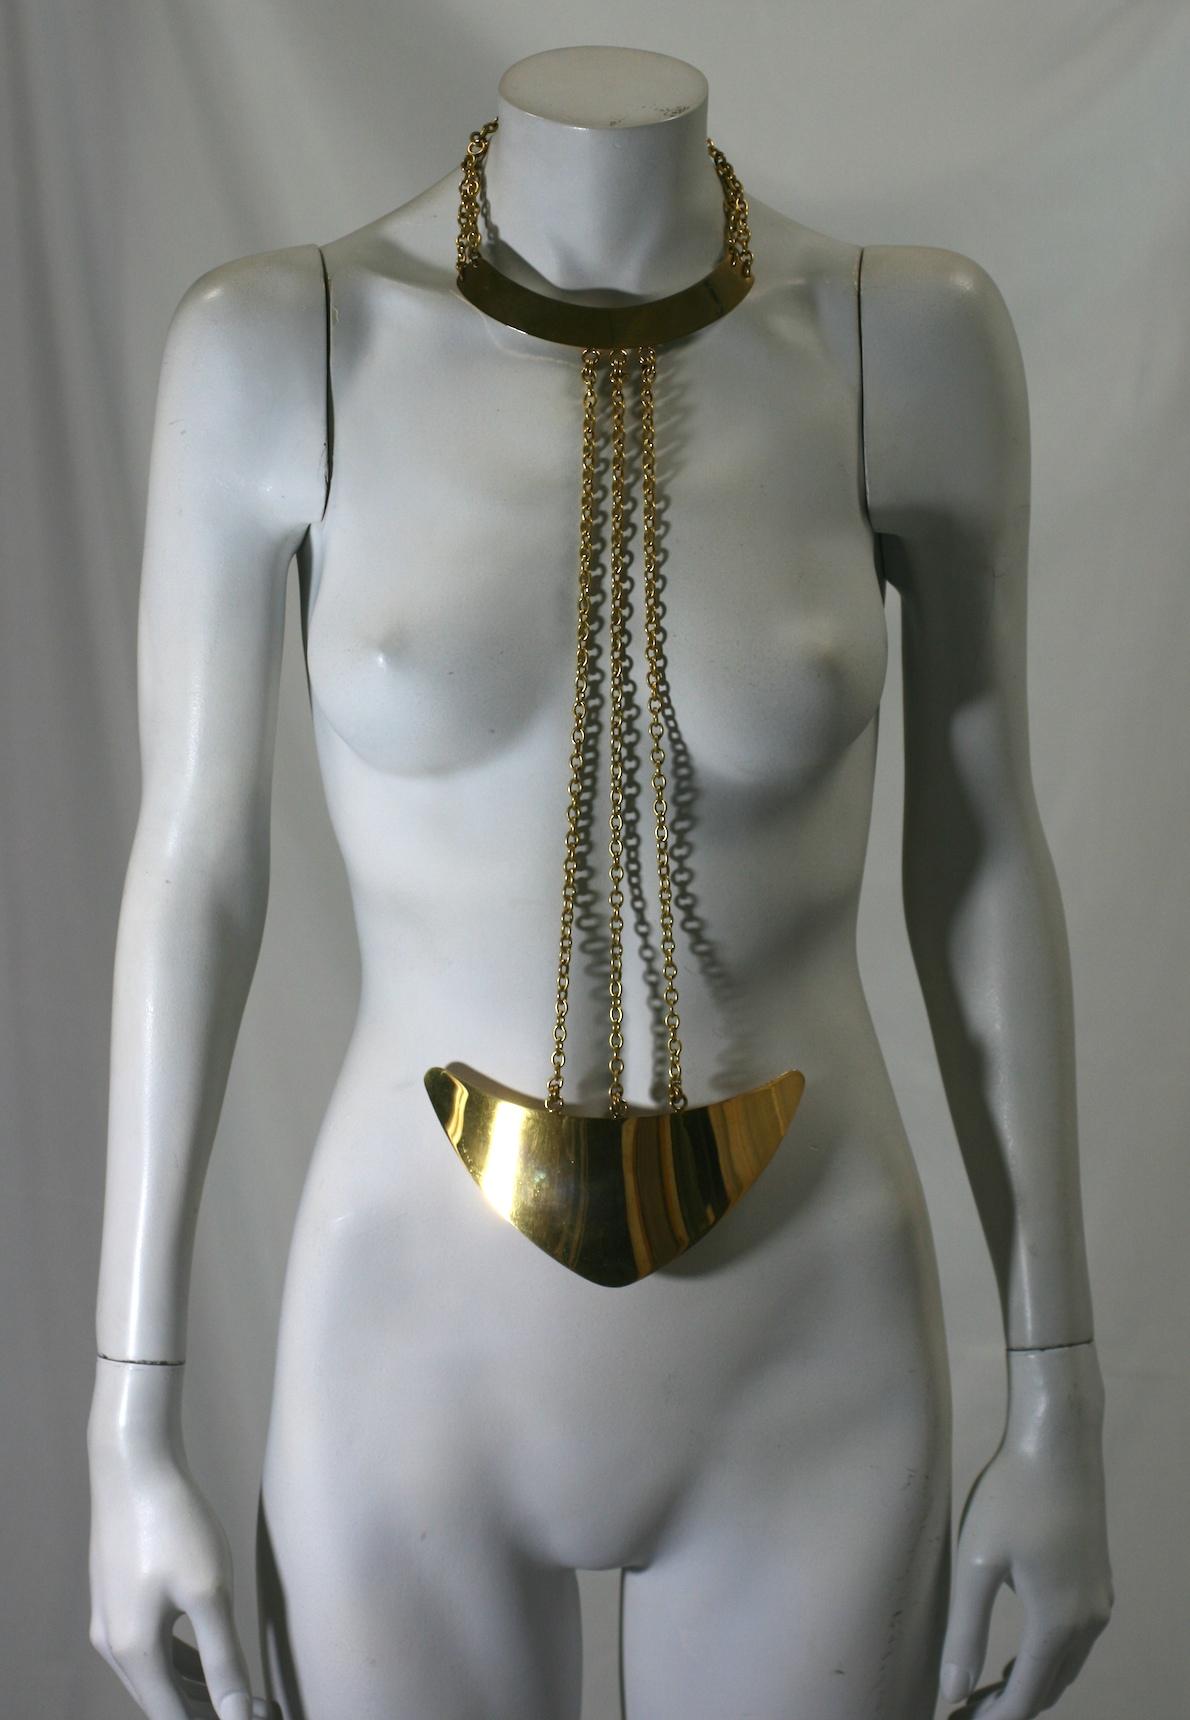 Rare Givenchy Body Jewel of gilt bronze from the 1960's. Designed surely to showcase a simple turtleneck mini in solid tones. This massive and rare design shows Givenchy responding to the 